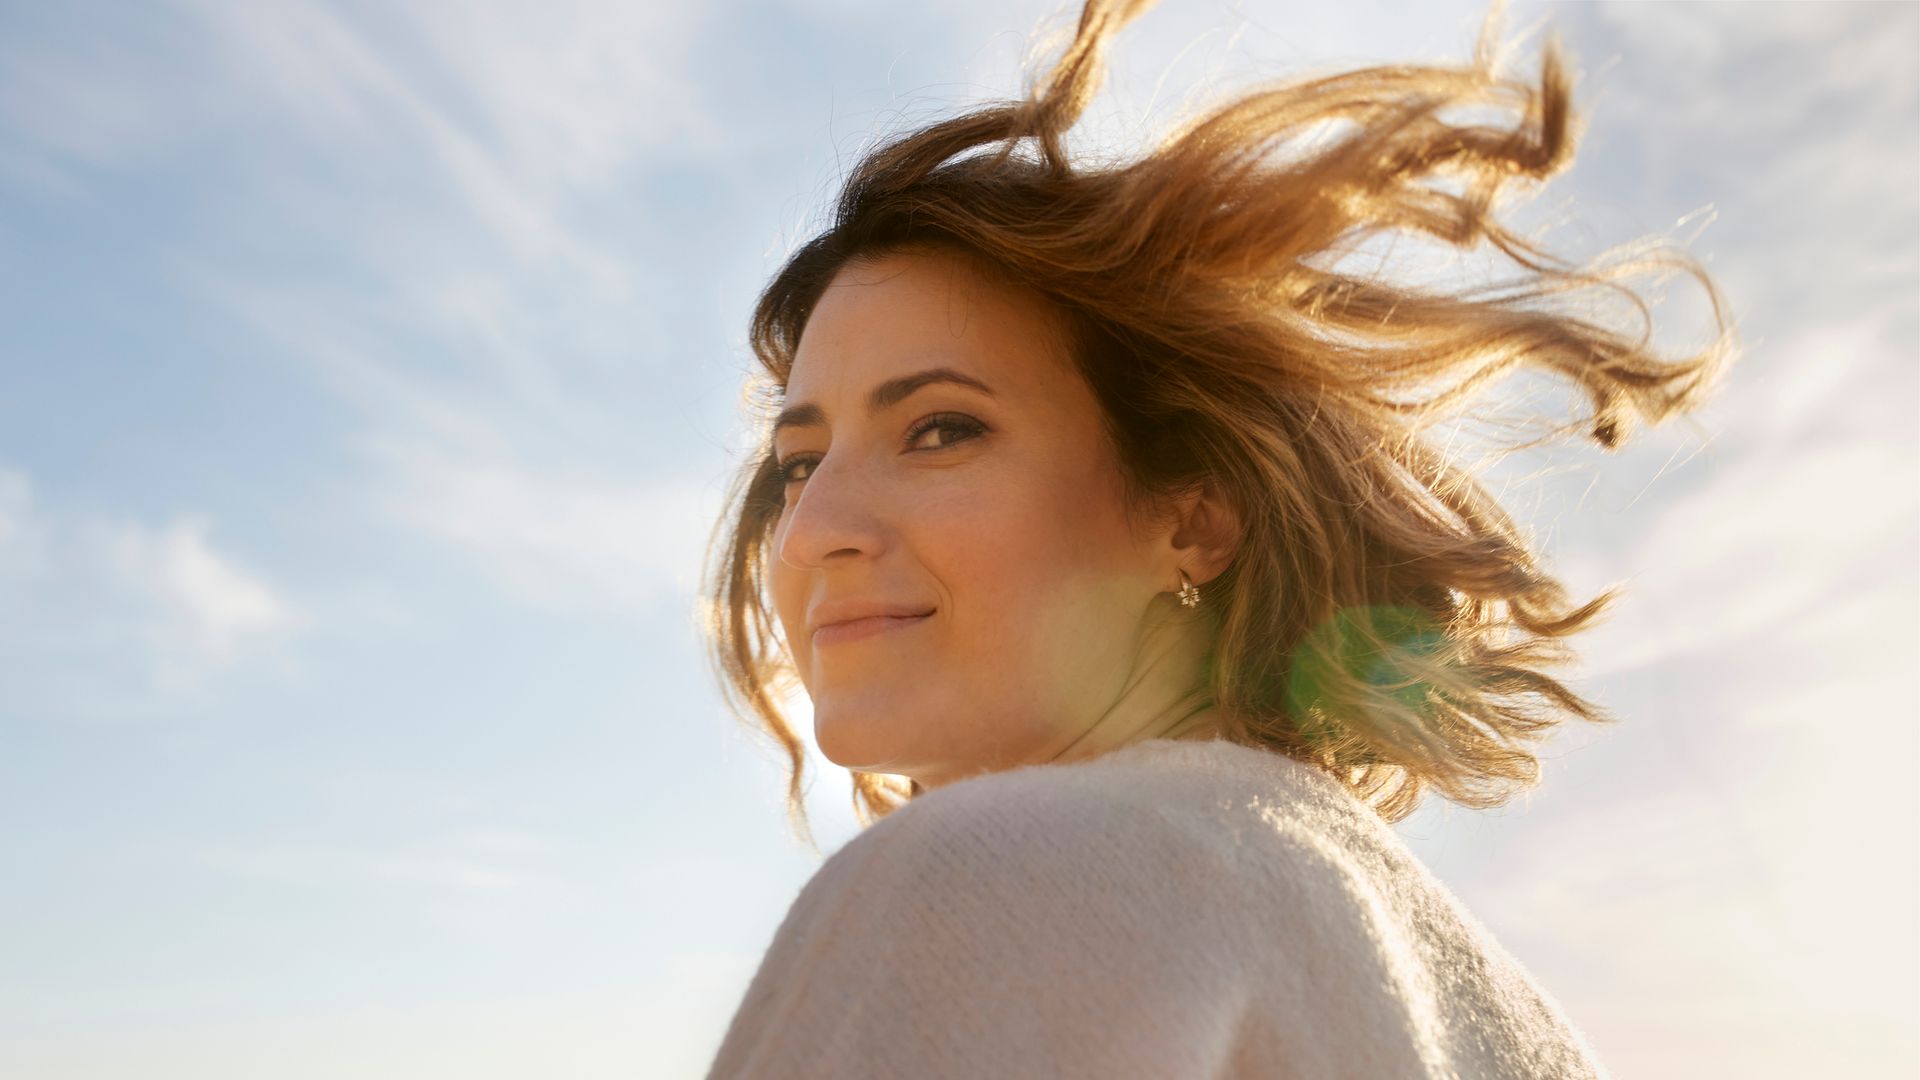 Portrait of smiling woman with tousled hair at sunset